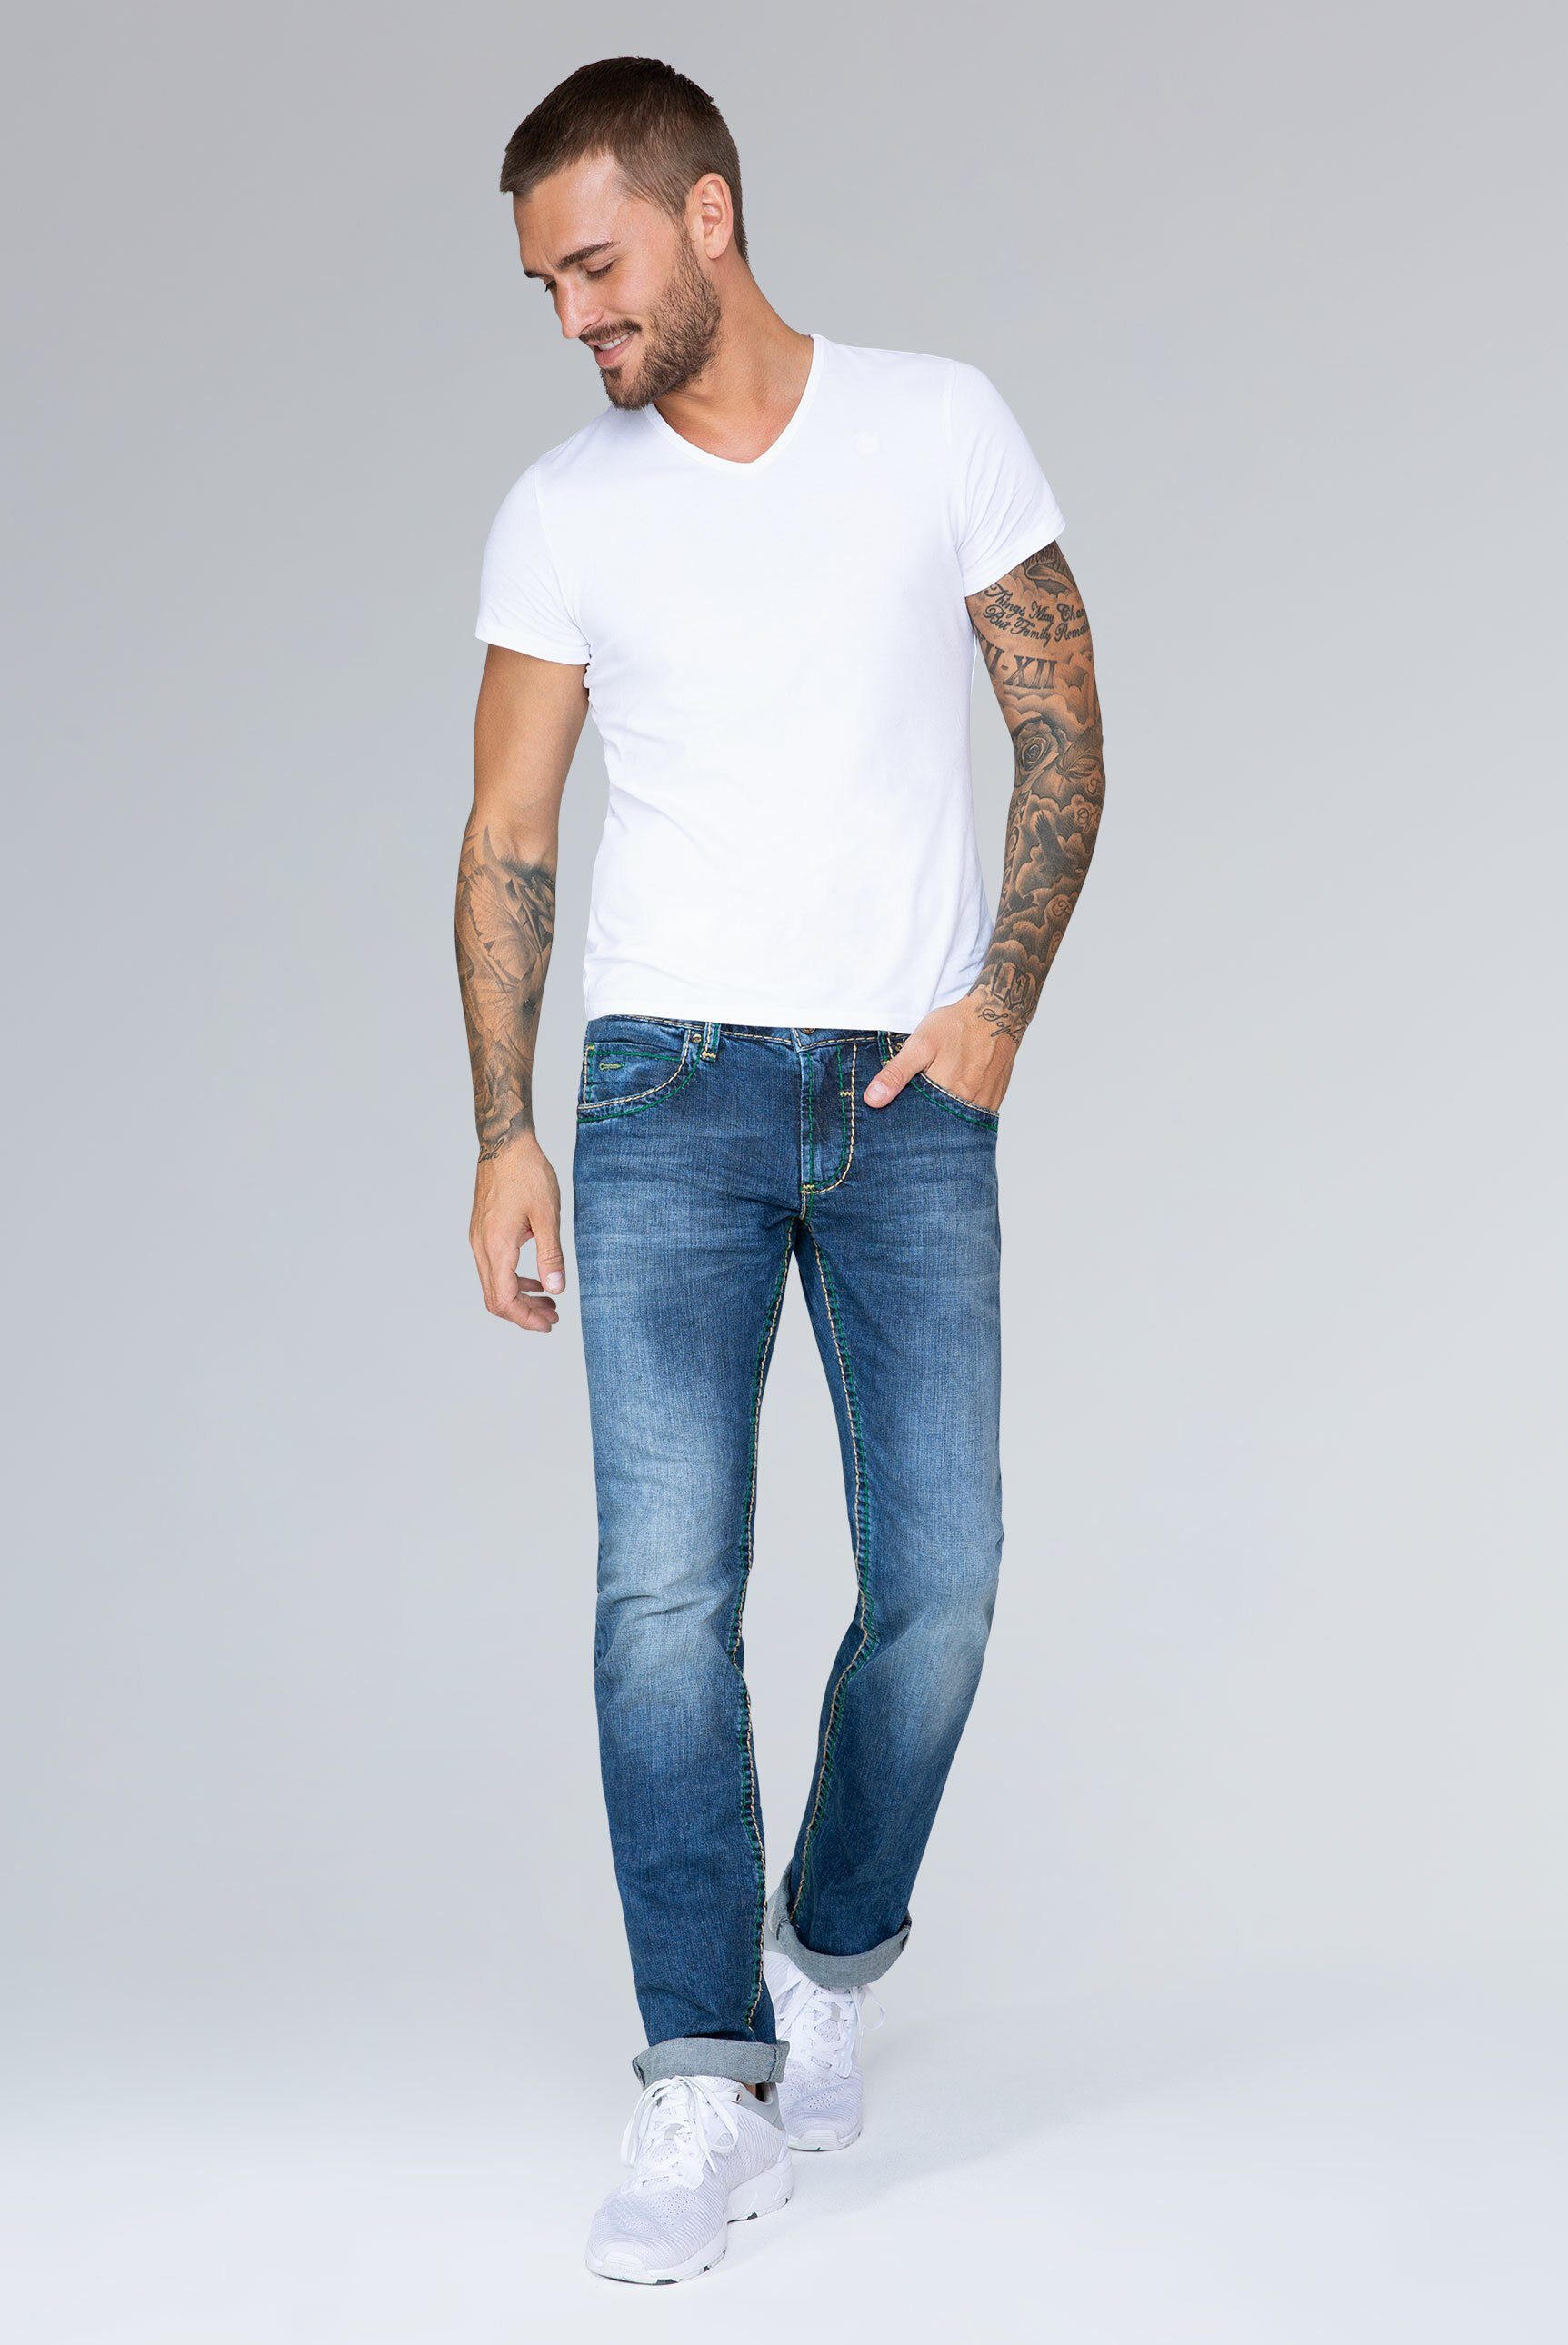 Used-Waschung NI:CO DAVID mit CAMP Regular-fit-Jeans